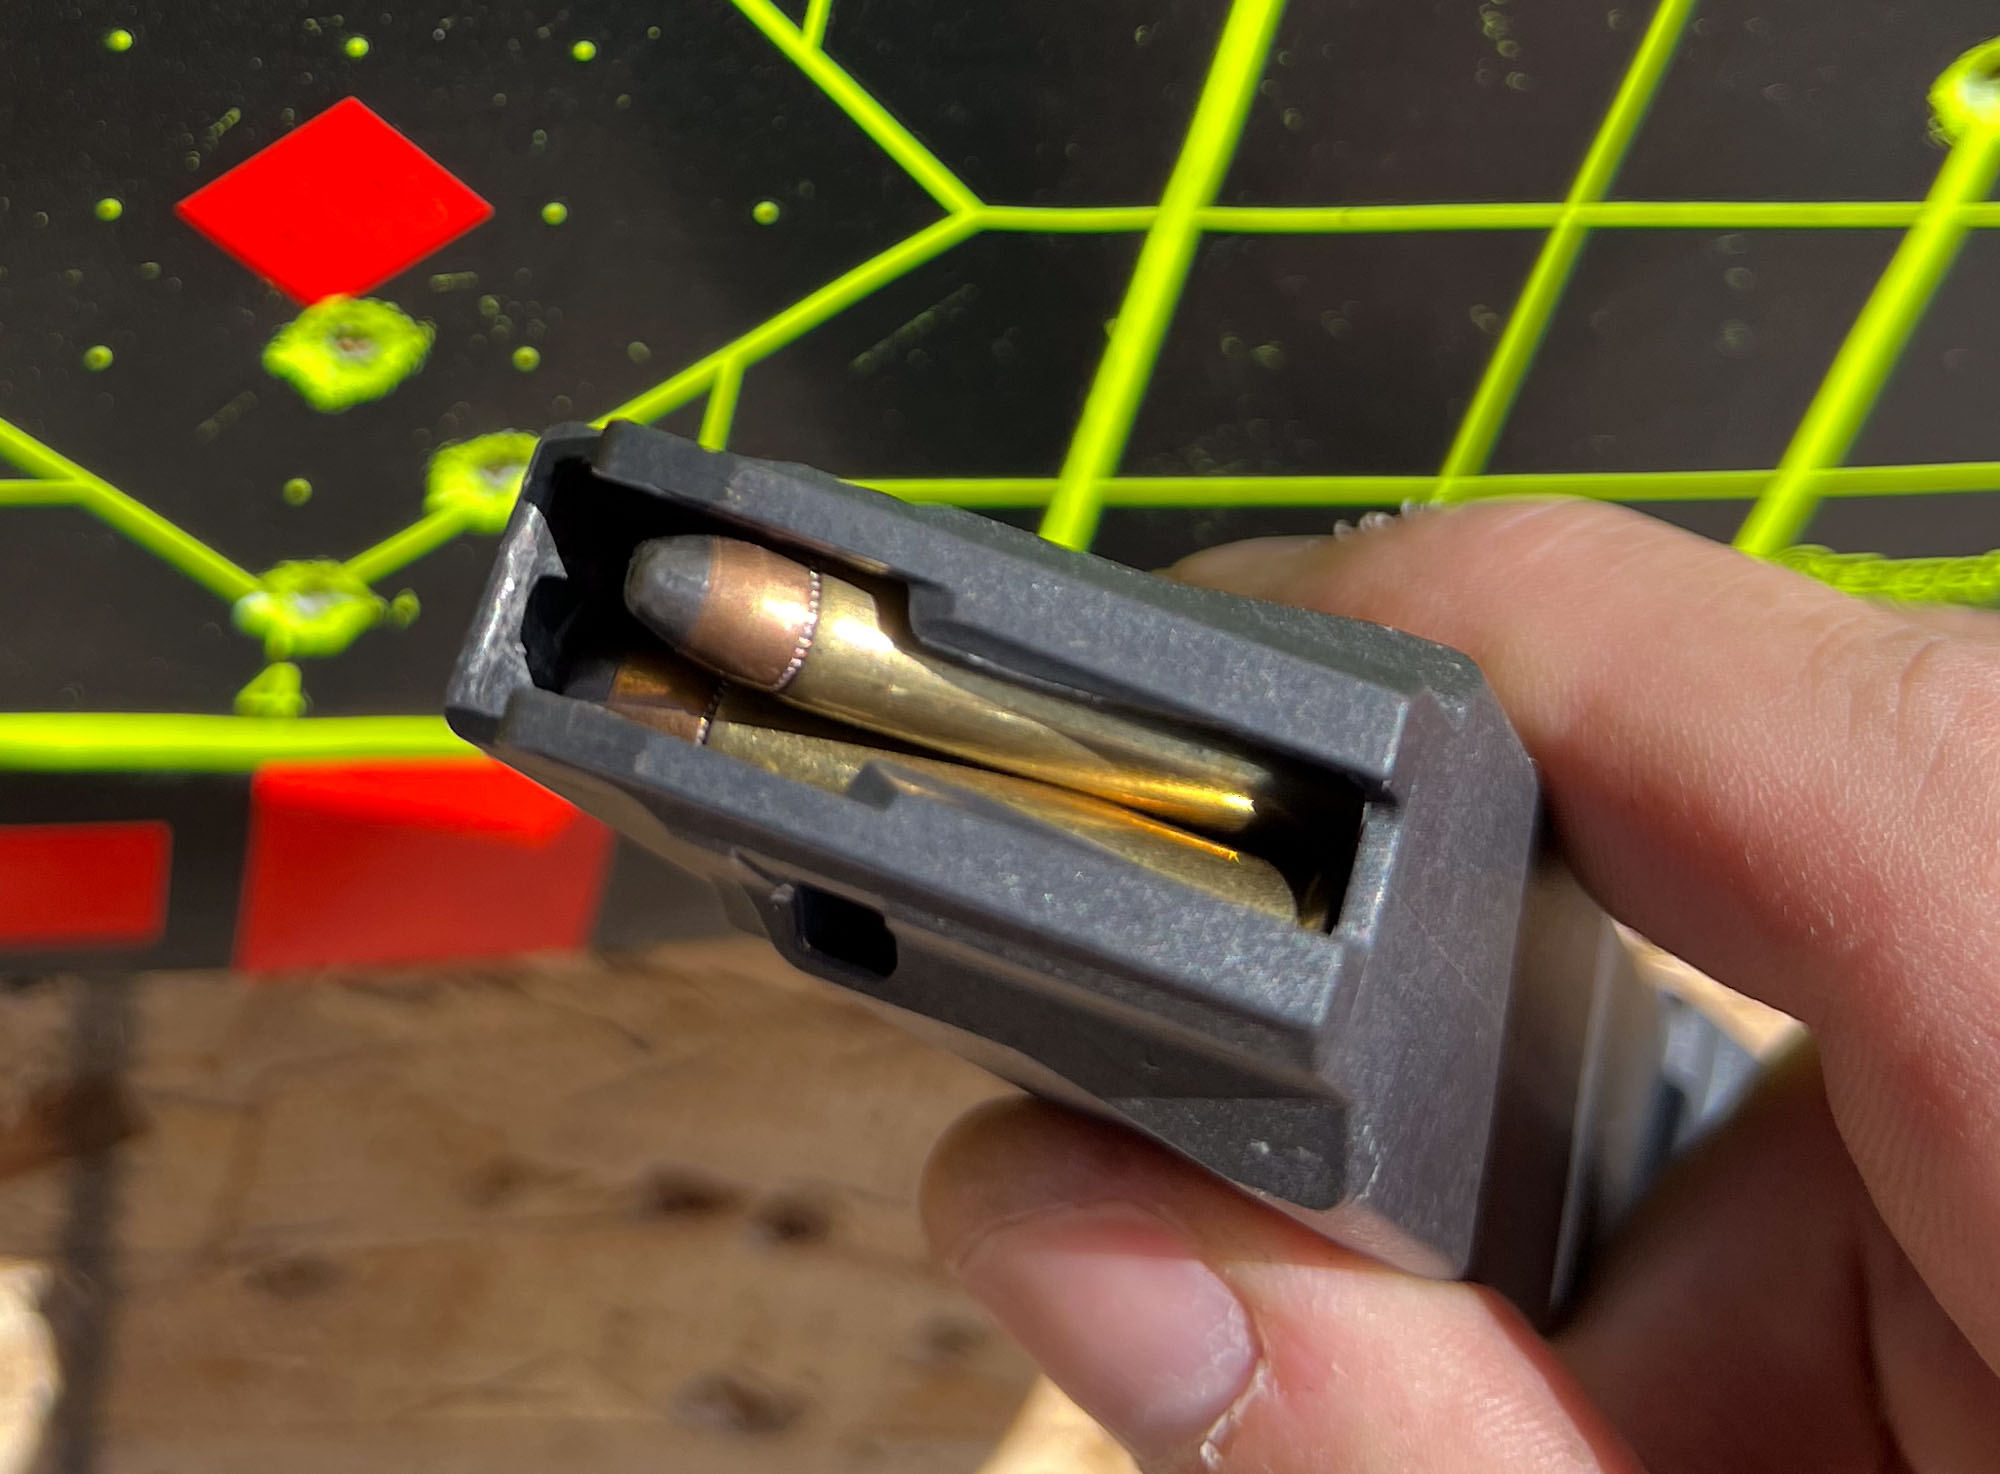 The Smith & Wesson M&P 22 Magnum had occasional feeding issues, as when this round tilted and jammed in the magazine. 